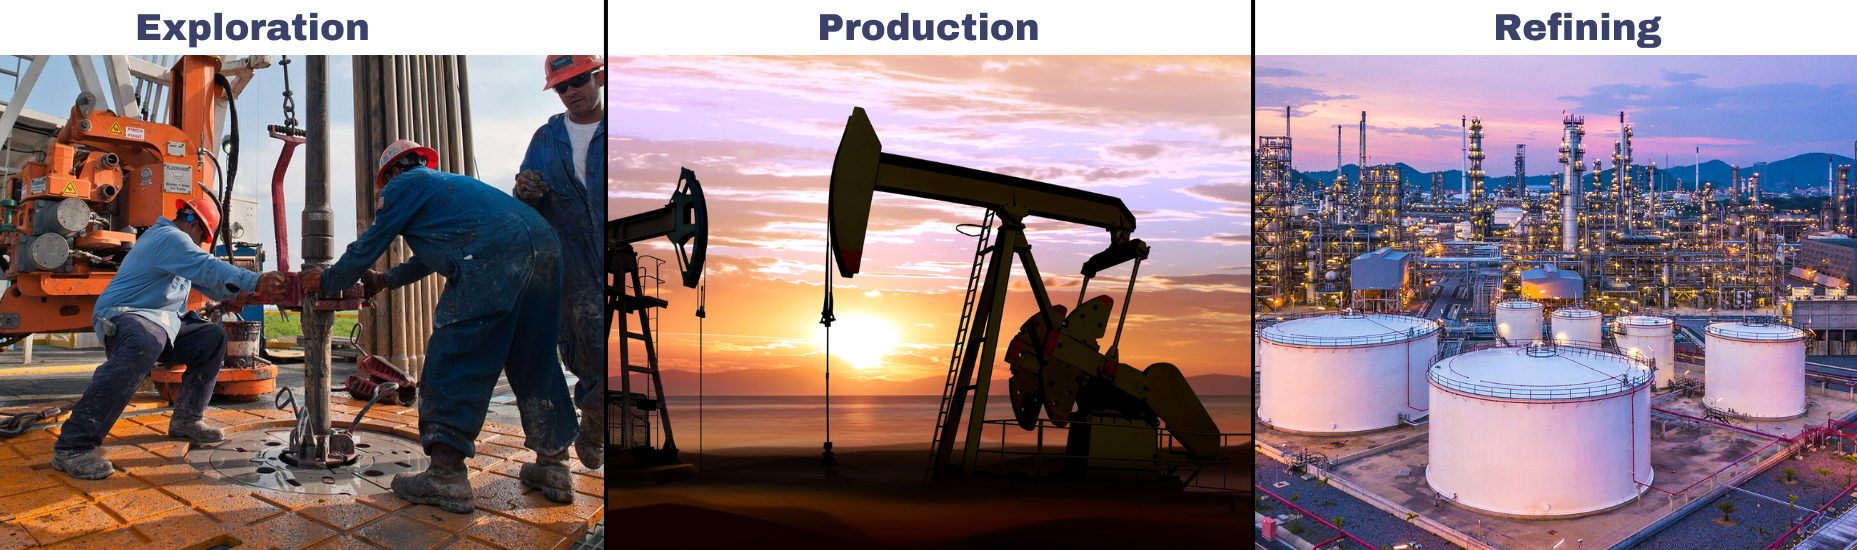 oil and gas safety solution, gas detection safety system in oil and gas exploration, refining and production